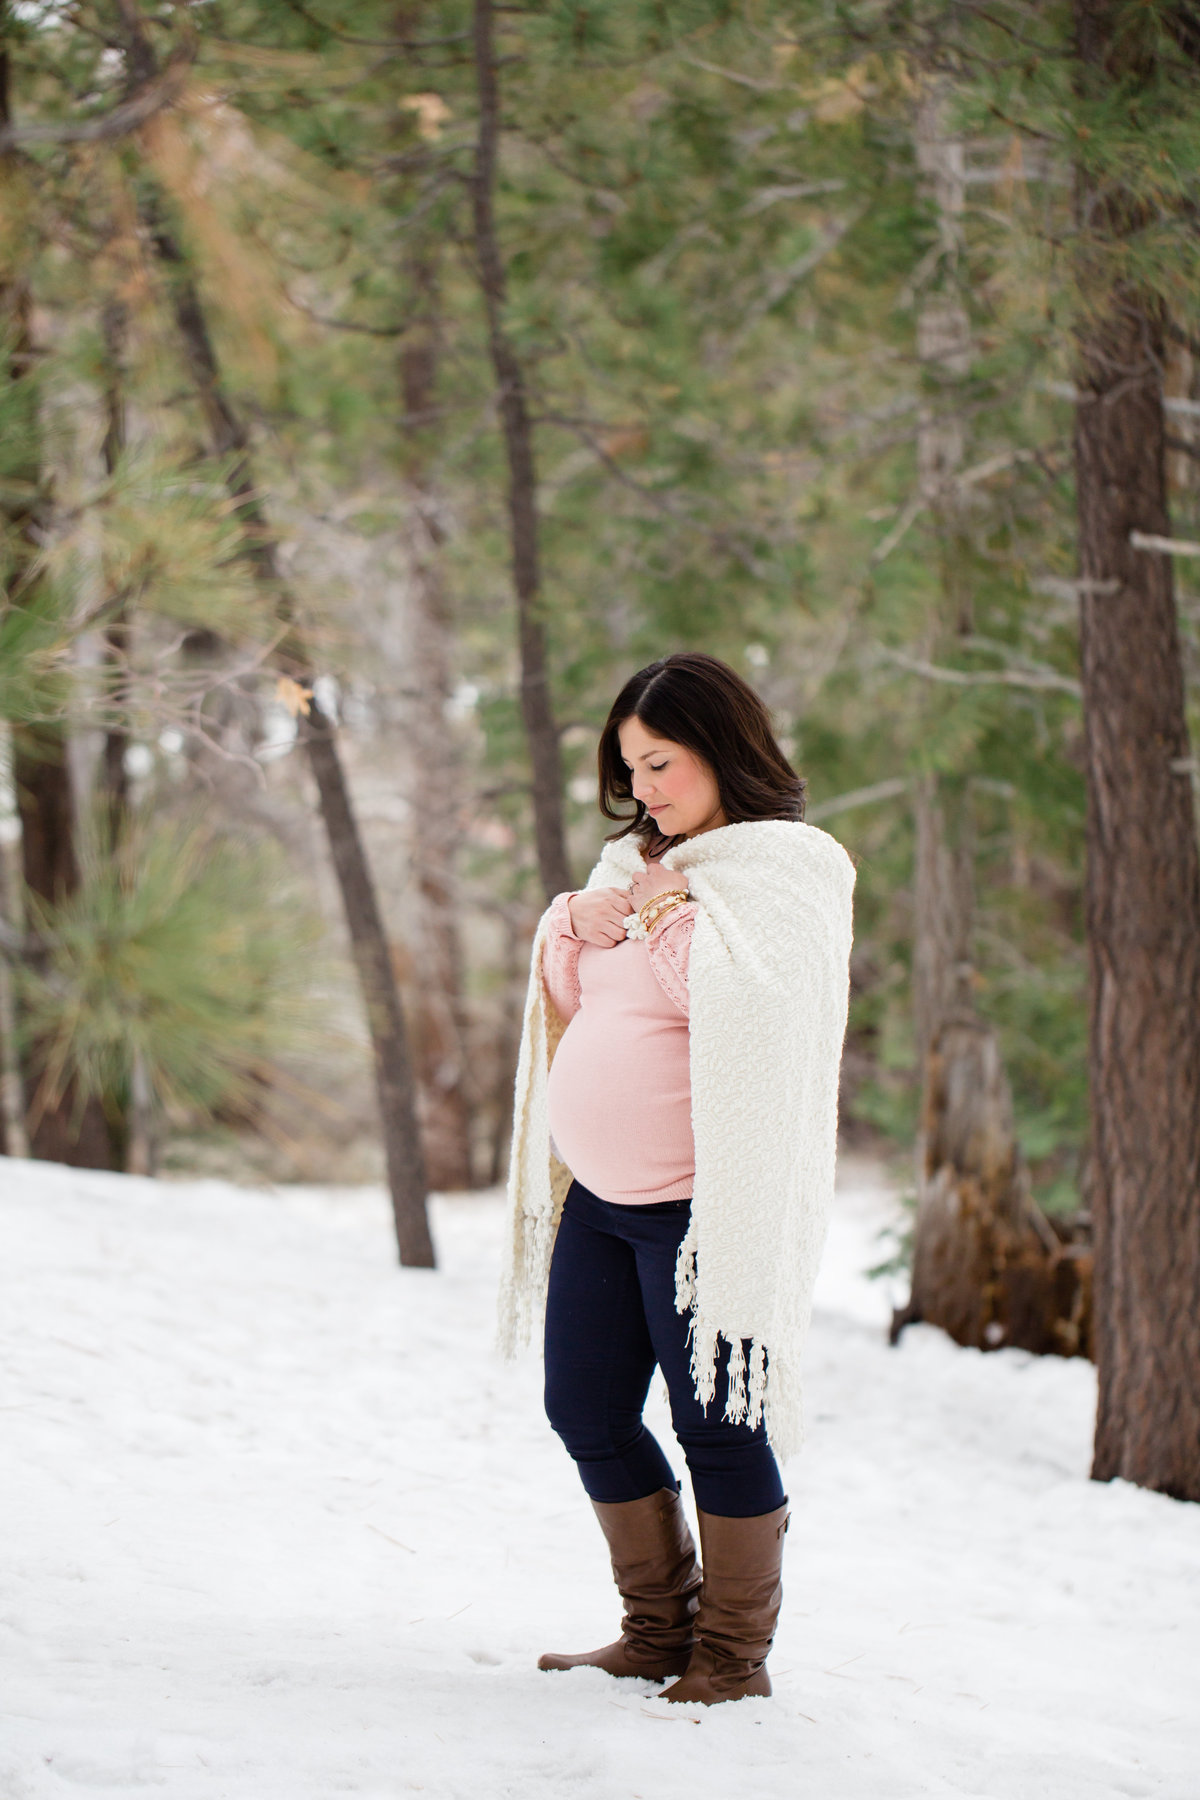 Laura_Maternity-4T2A7816-edited